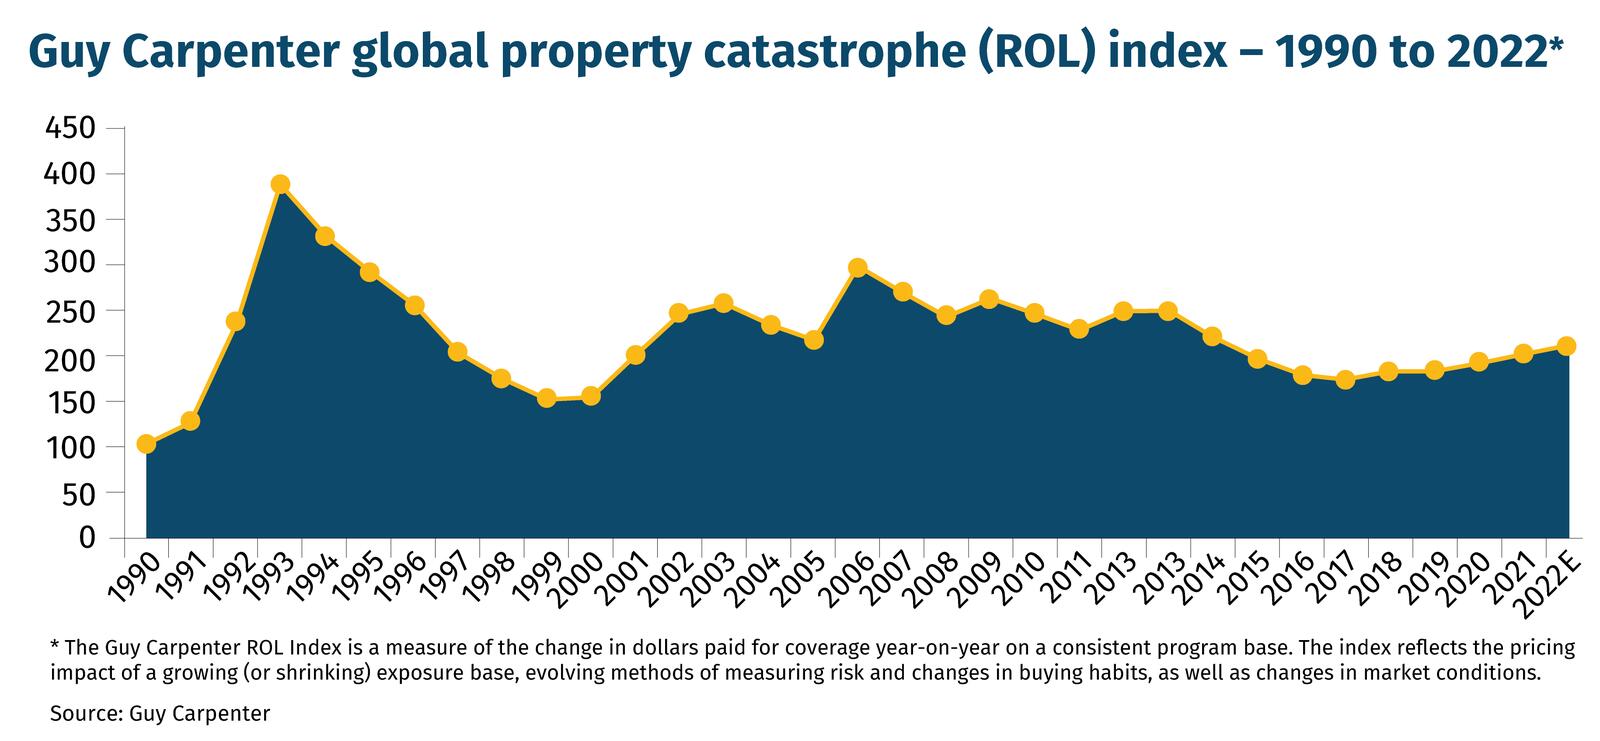 Guy Carpenter global property catastrophe (ROL) index – 1990 to 2022* 